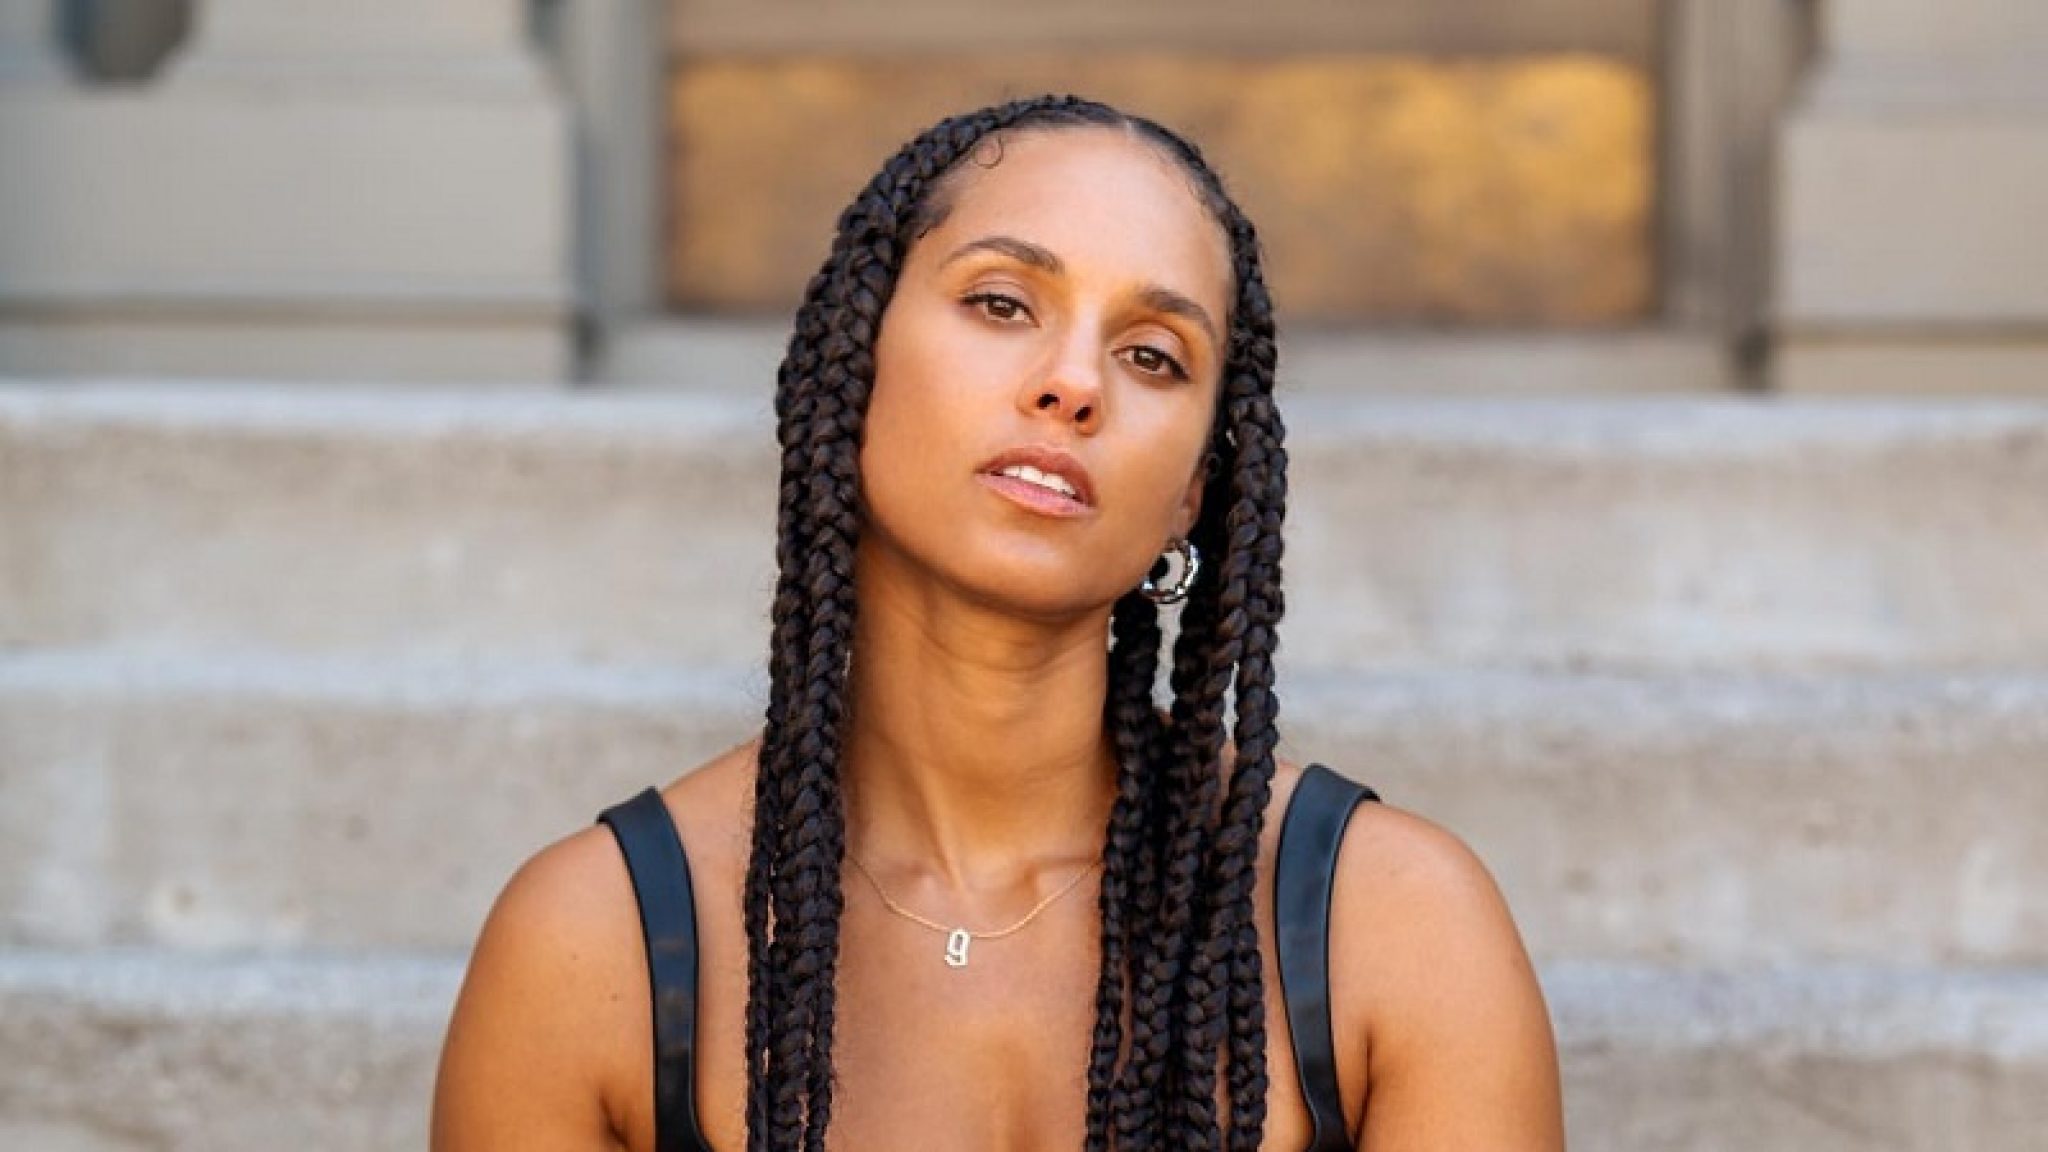 Alicia Keys Unveils Her Beauty Brand “soulcare” In A New Campaign Video